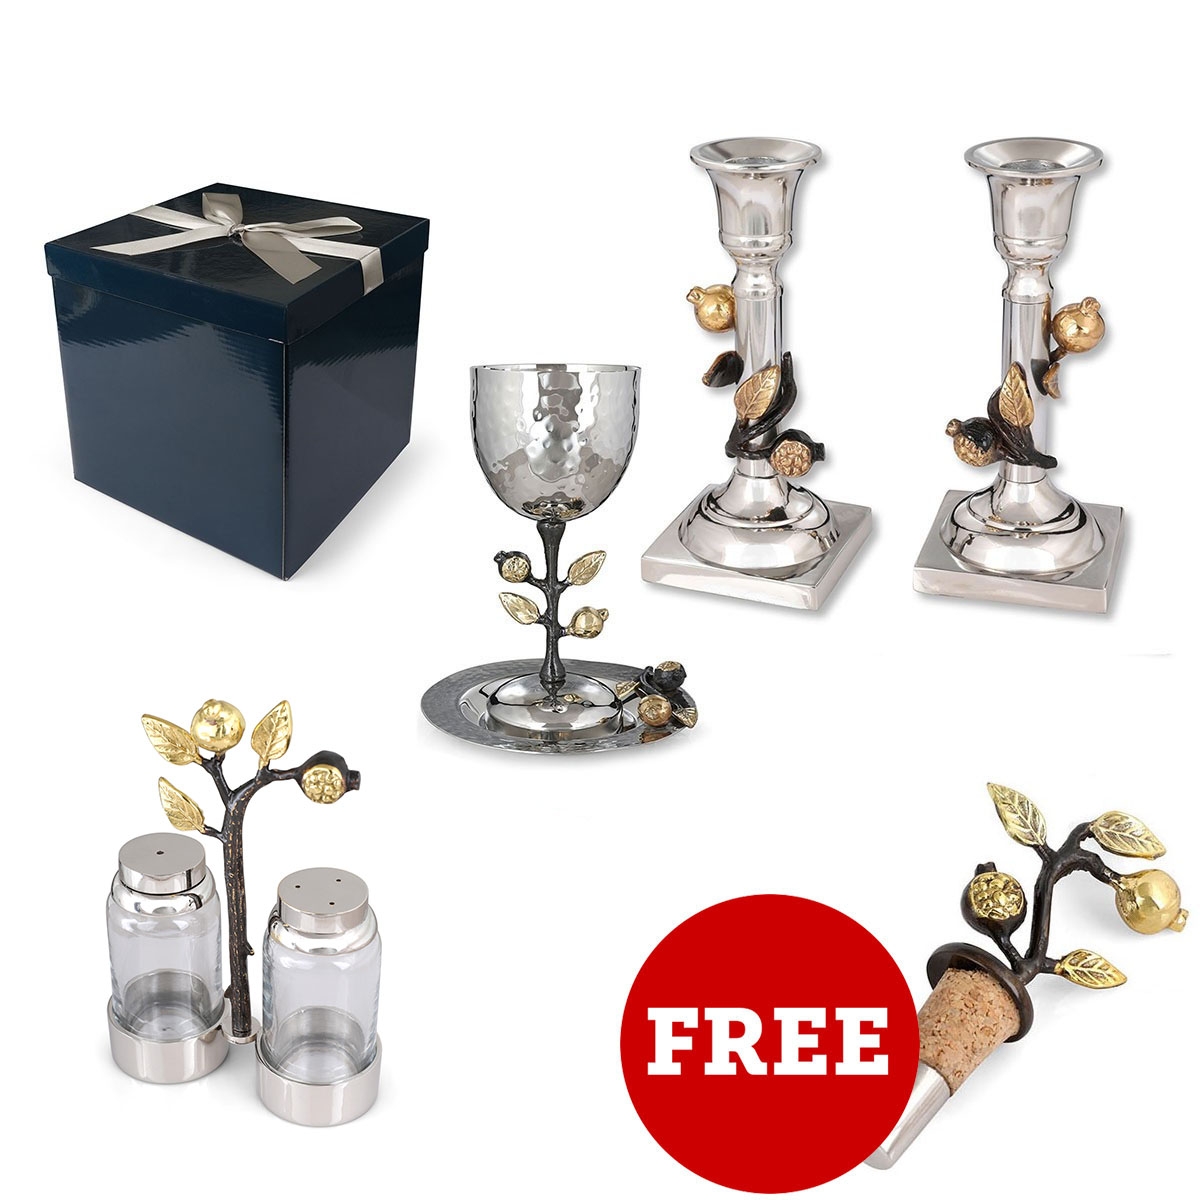 Yair Emanuel Exclusive Judaica Gift Set - Buy Three Luxurious Works of Judaica, Get a Pomegranate Wine Cork For Free! - 1